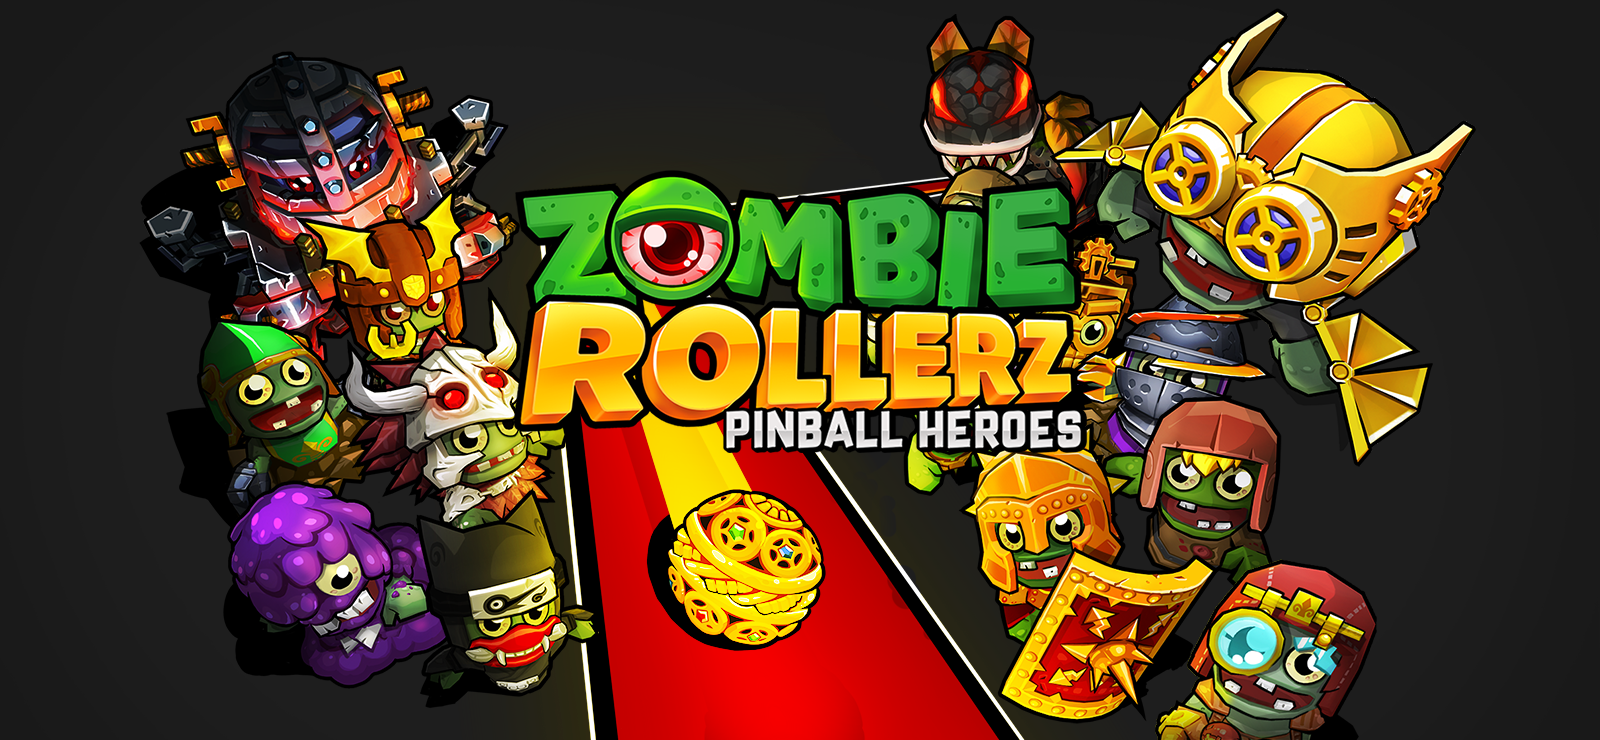 Zombie Rollerz: Pinball Heroes download the last version for ipod